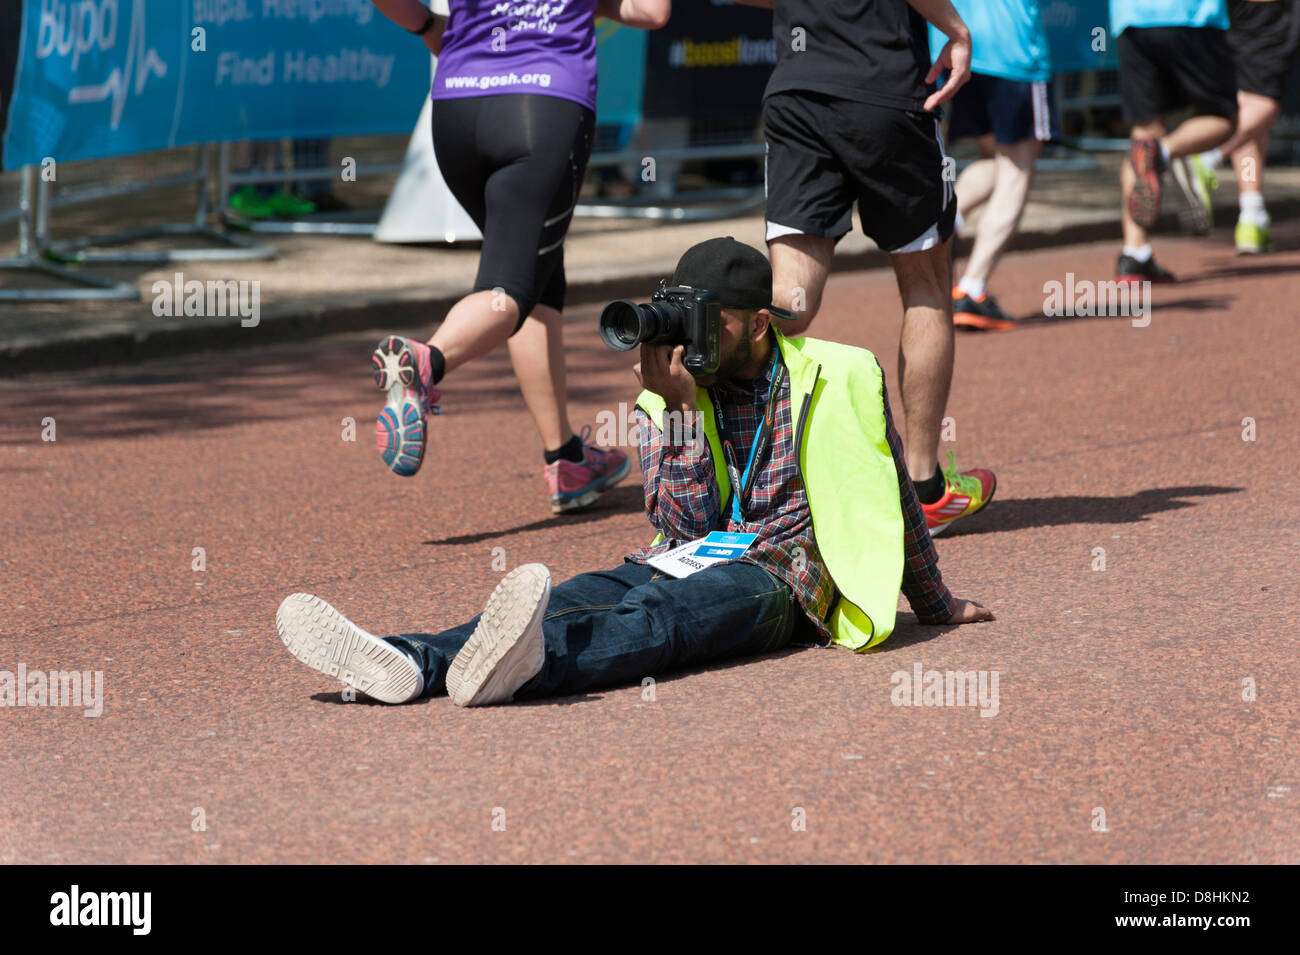 A marathon foto photographer taking photos at the BUPA London 10k run 2013, sitting in road with blurred runners passing him Stock Photo